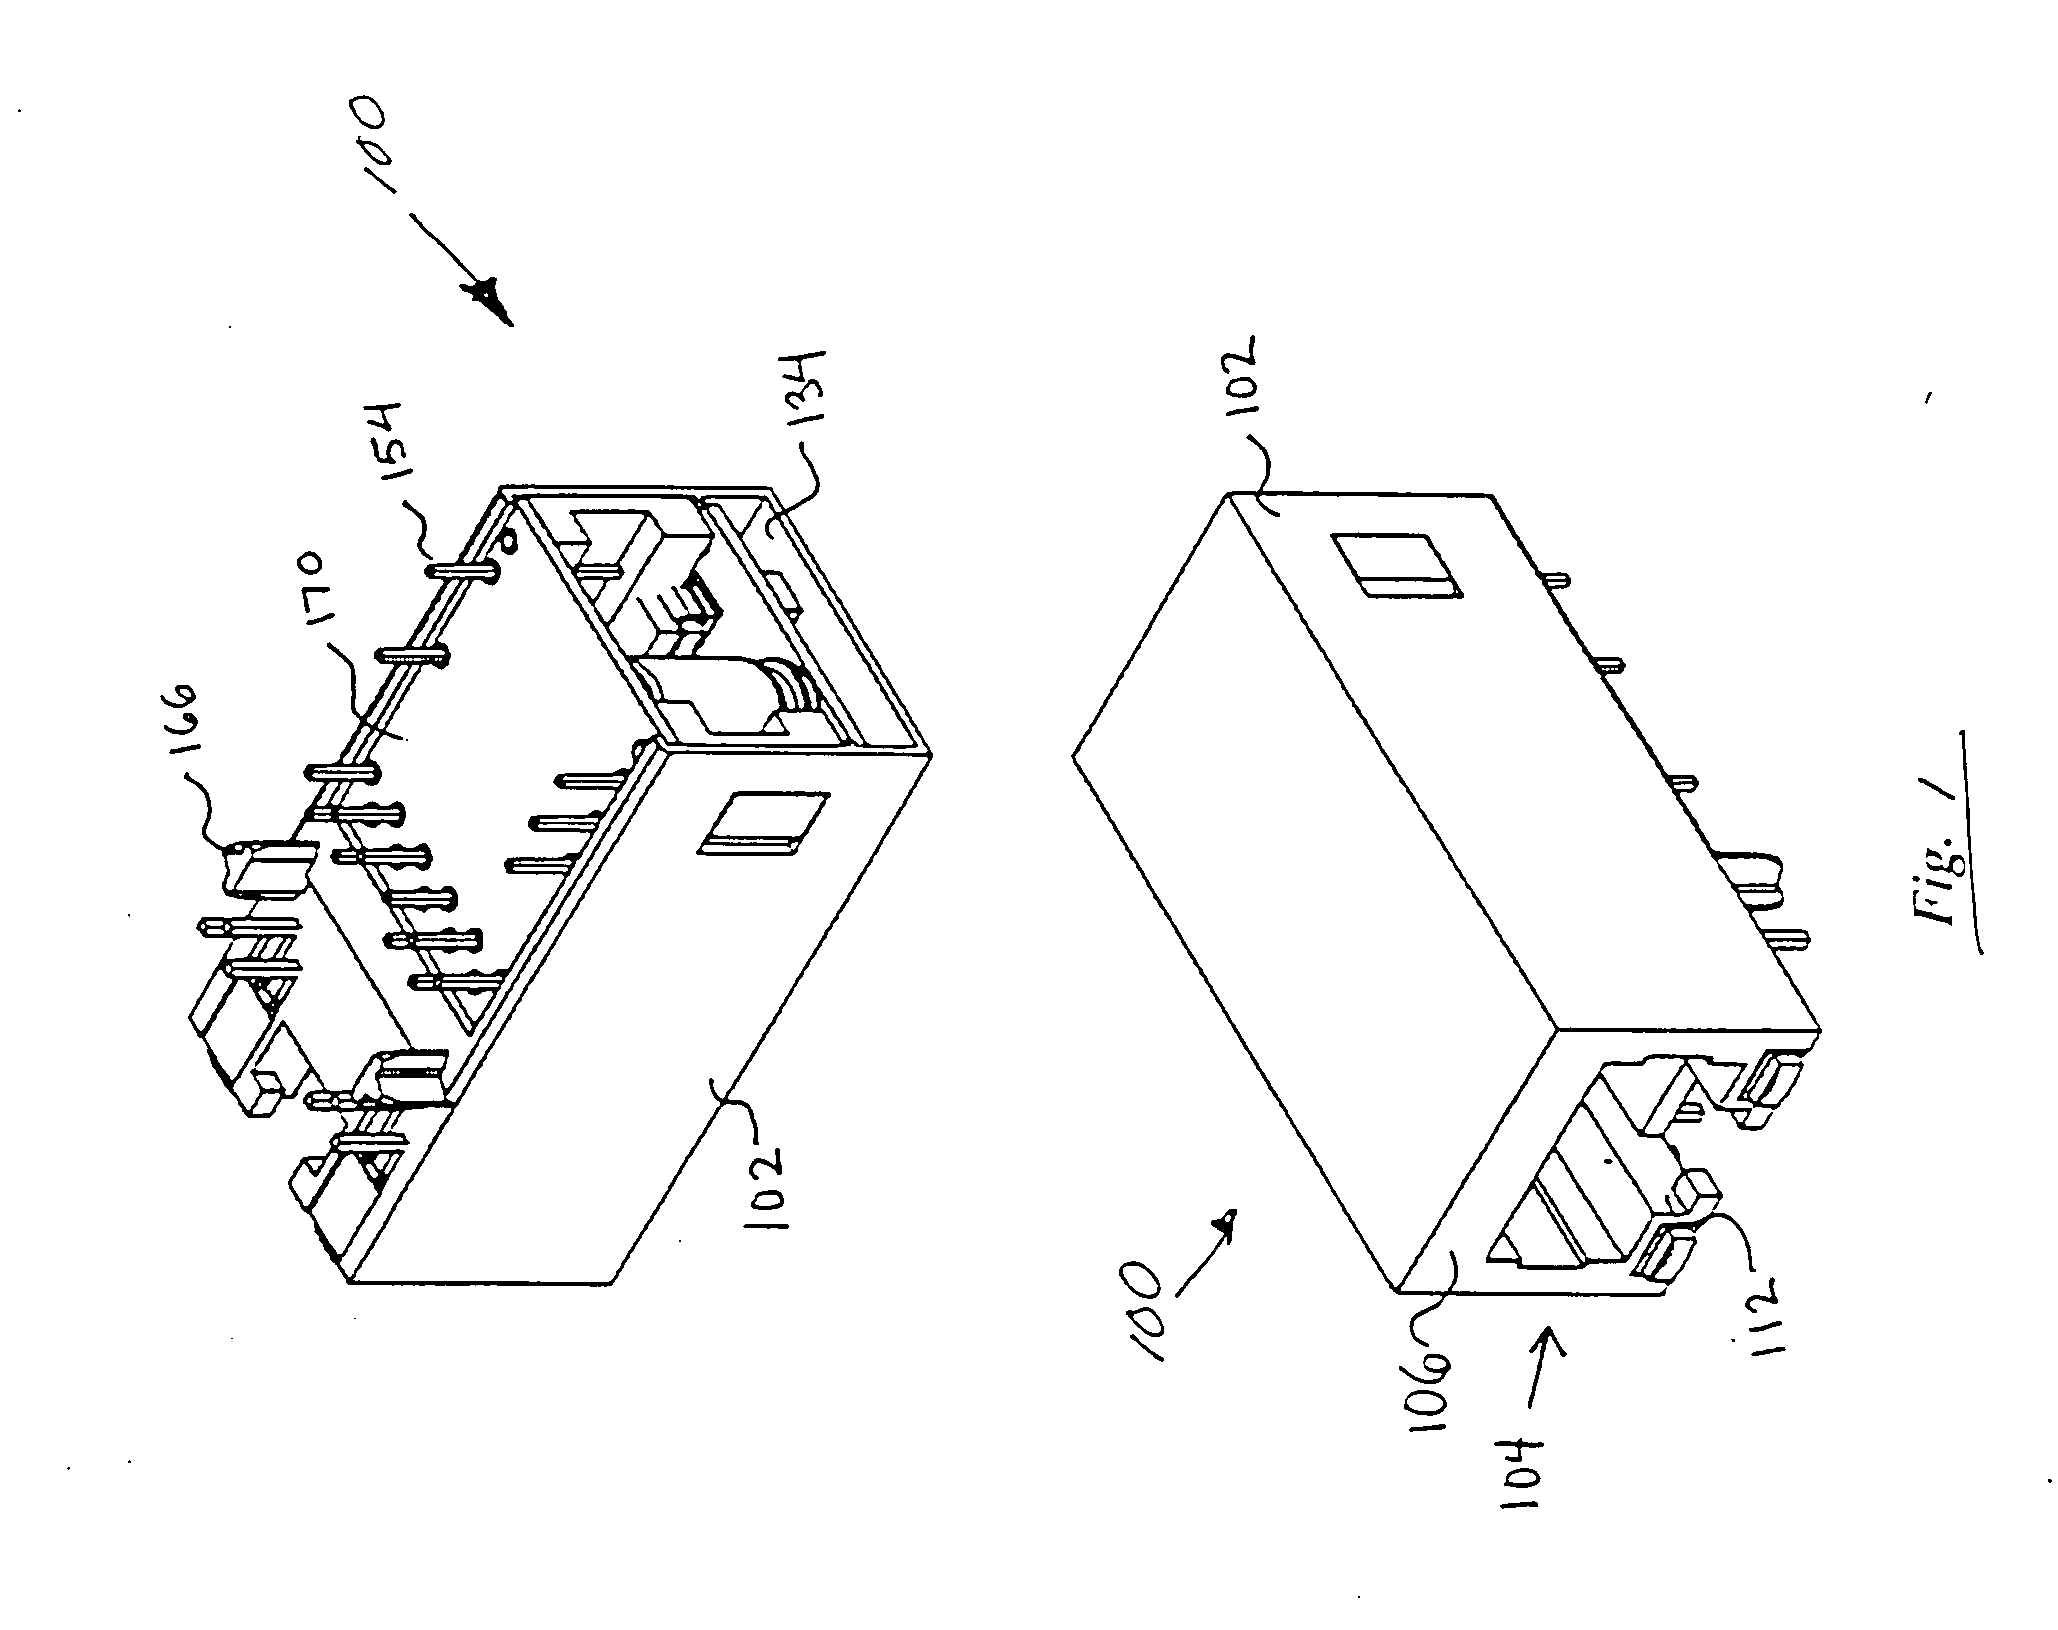 Power-enabled connector assembly and method of manufacturing